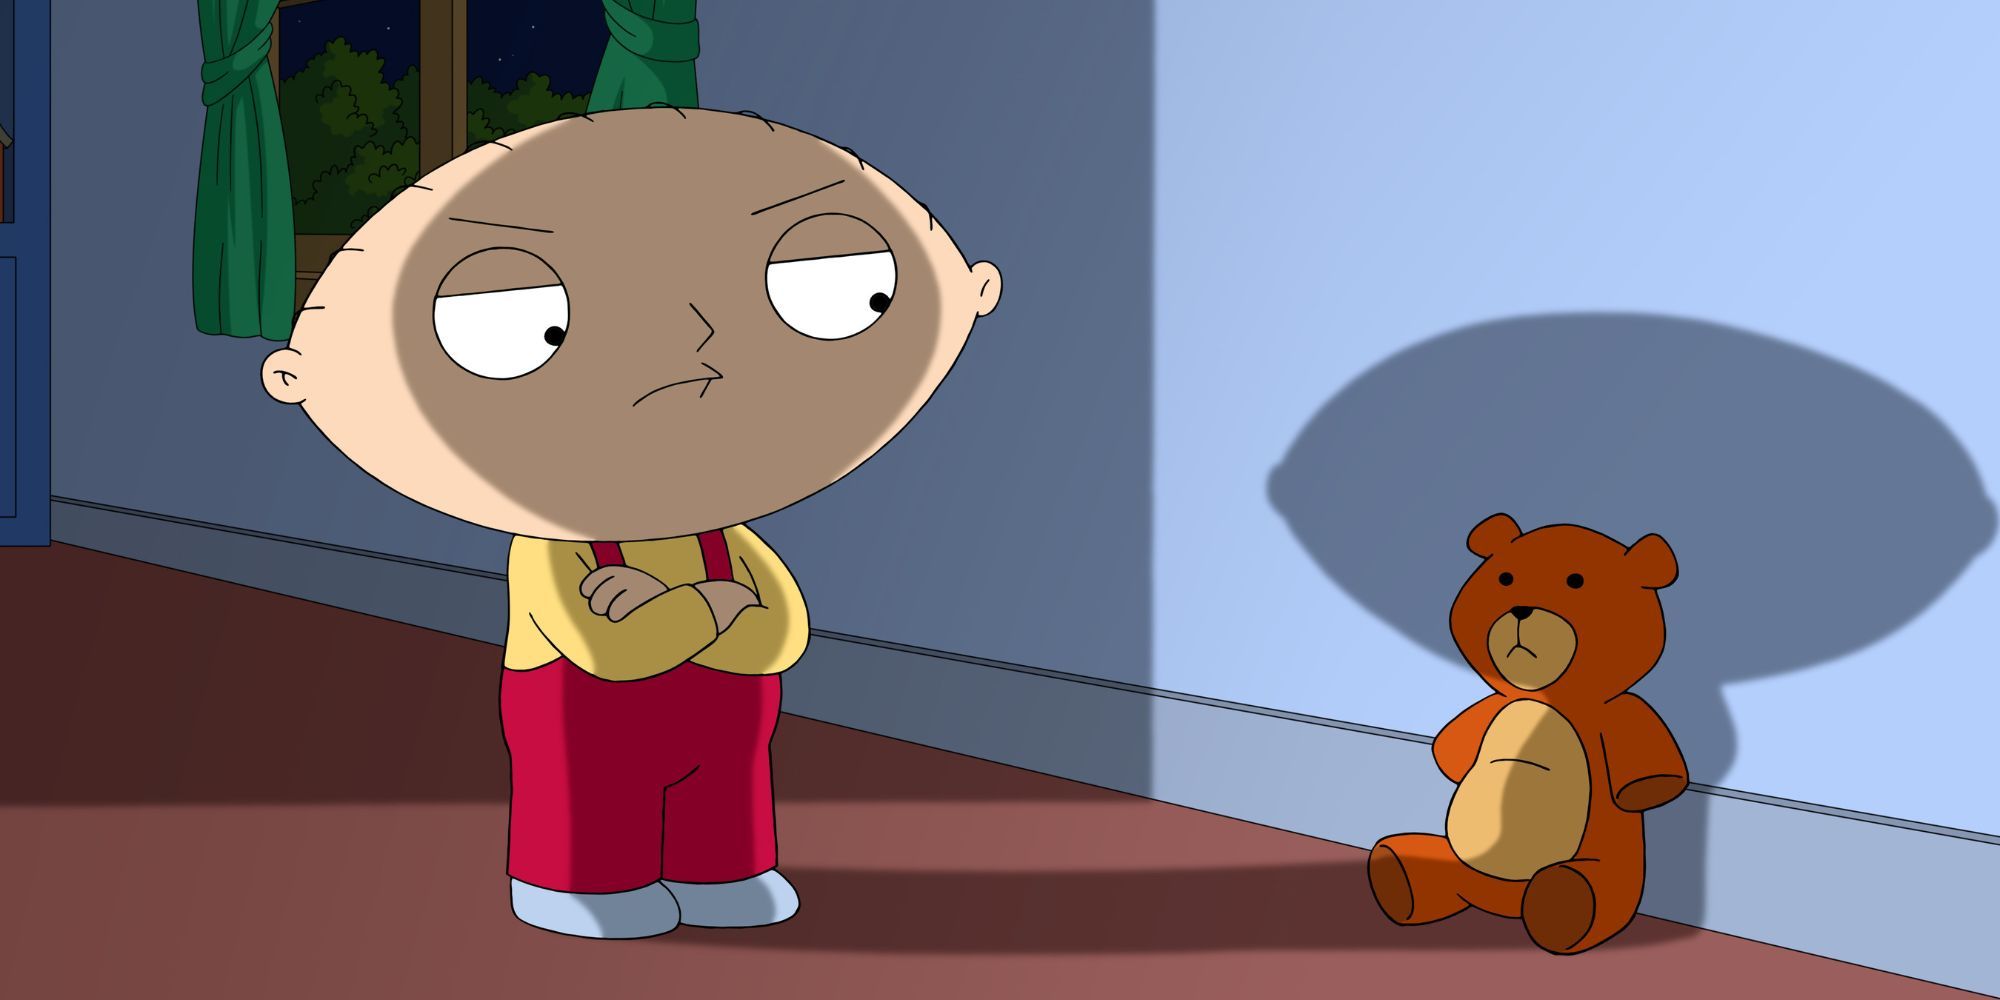 Stewie Griffin standing with his arms crossed against his chest while staring at his teddy bear Rupert in Family Guy